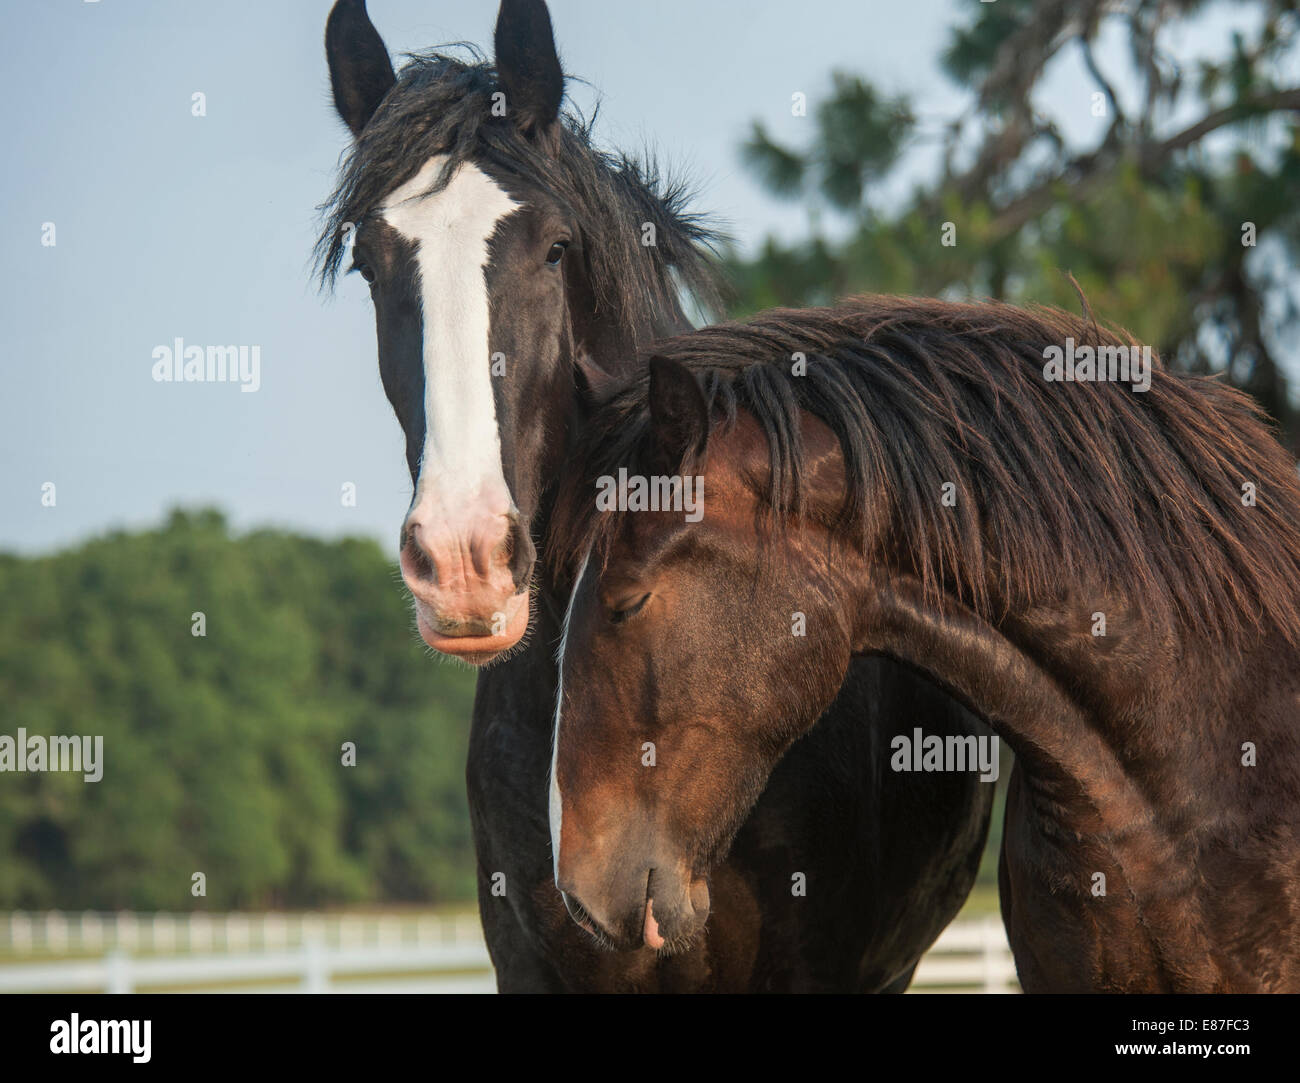 Shire Draft horse yearlings Stock Photo